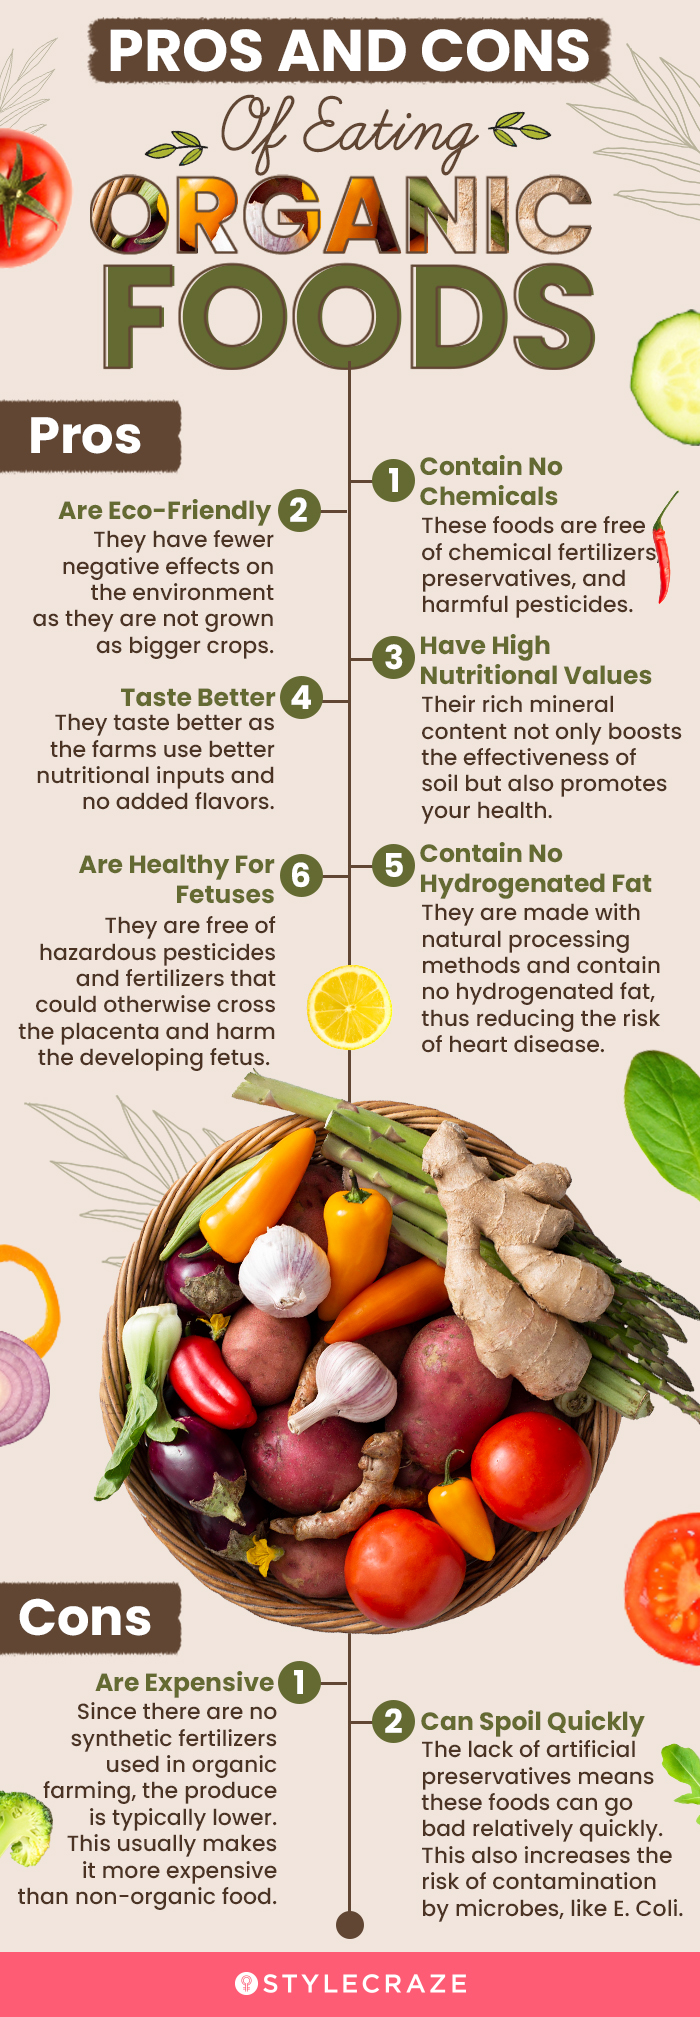 pros and cons of eating organic foods (infographic)